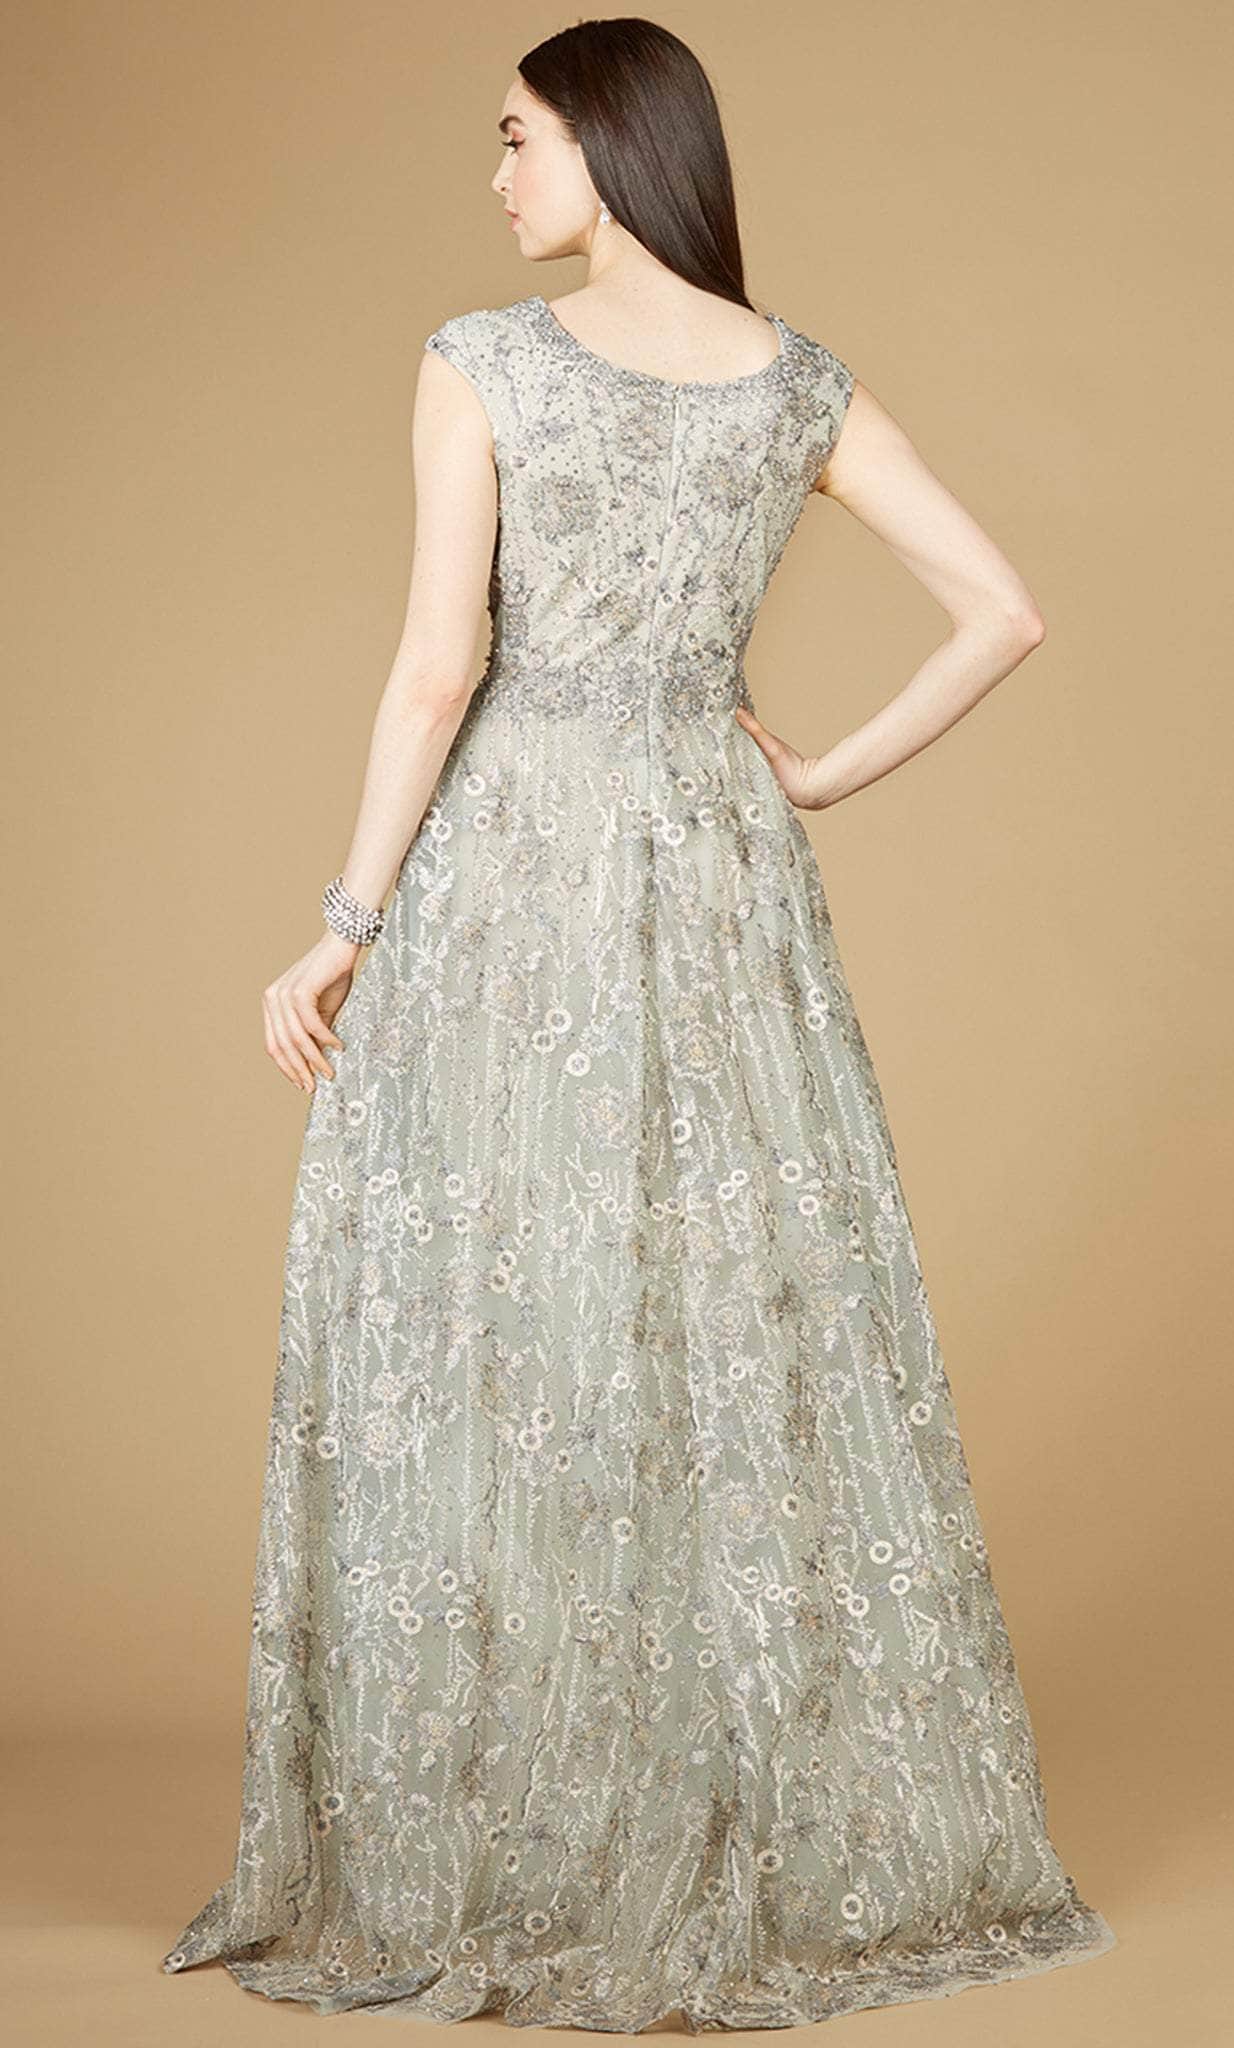 Lara Dresses 29236 - Cap Sleeved Beaded Gown Special Occasion Dress